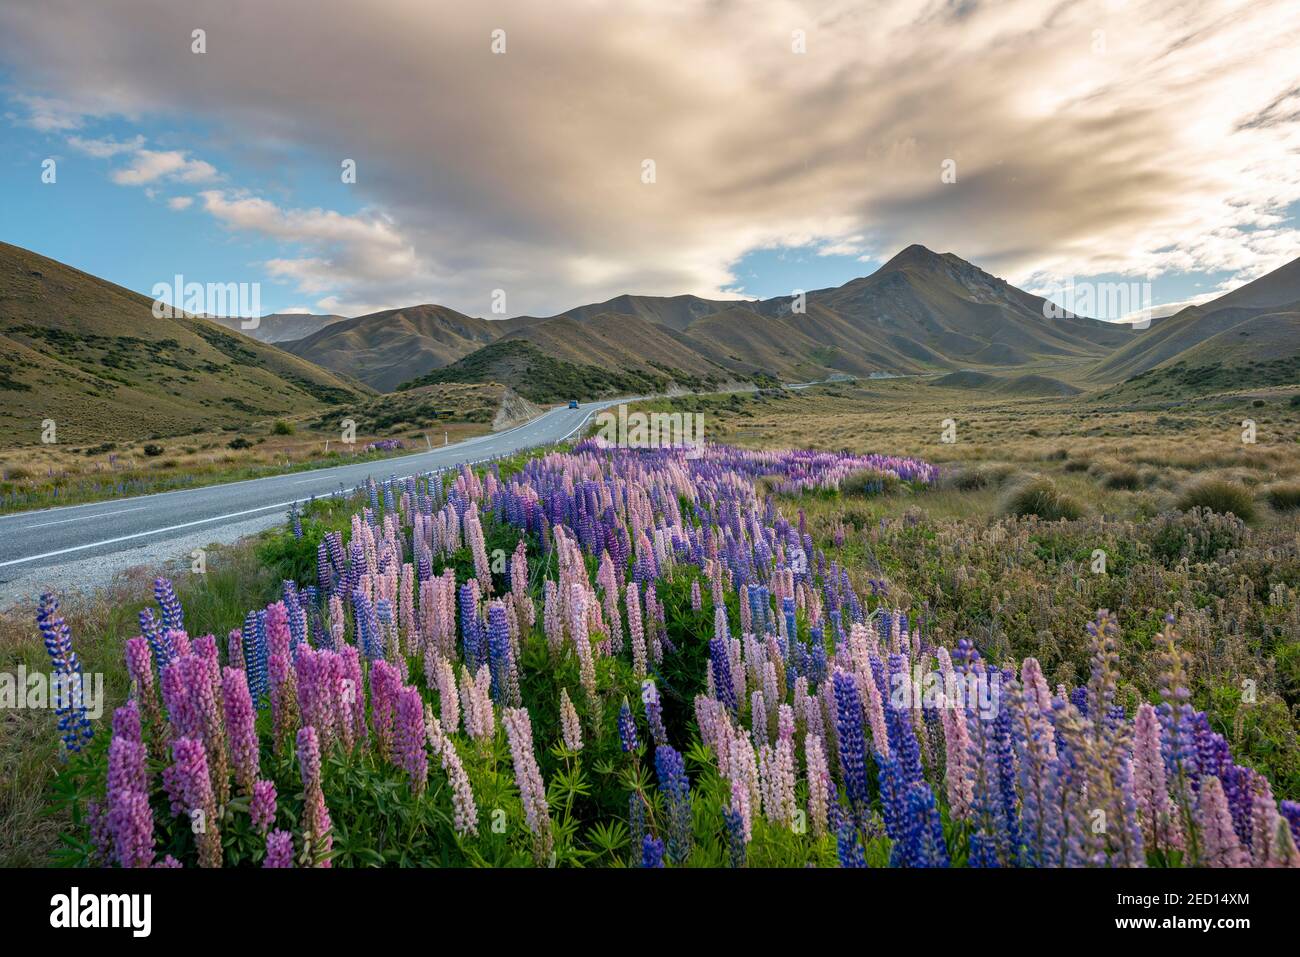 Variegated lupines (Lupinus polyphyllus) in mountain landscape, pass road at Lindis Pass, Southern Alps, Otago, South Island, New Zealand Stock Photo